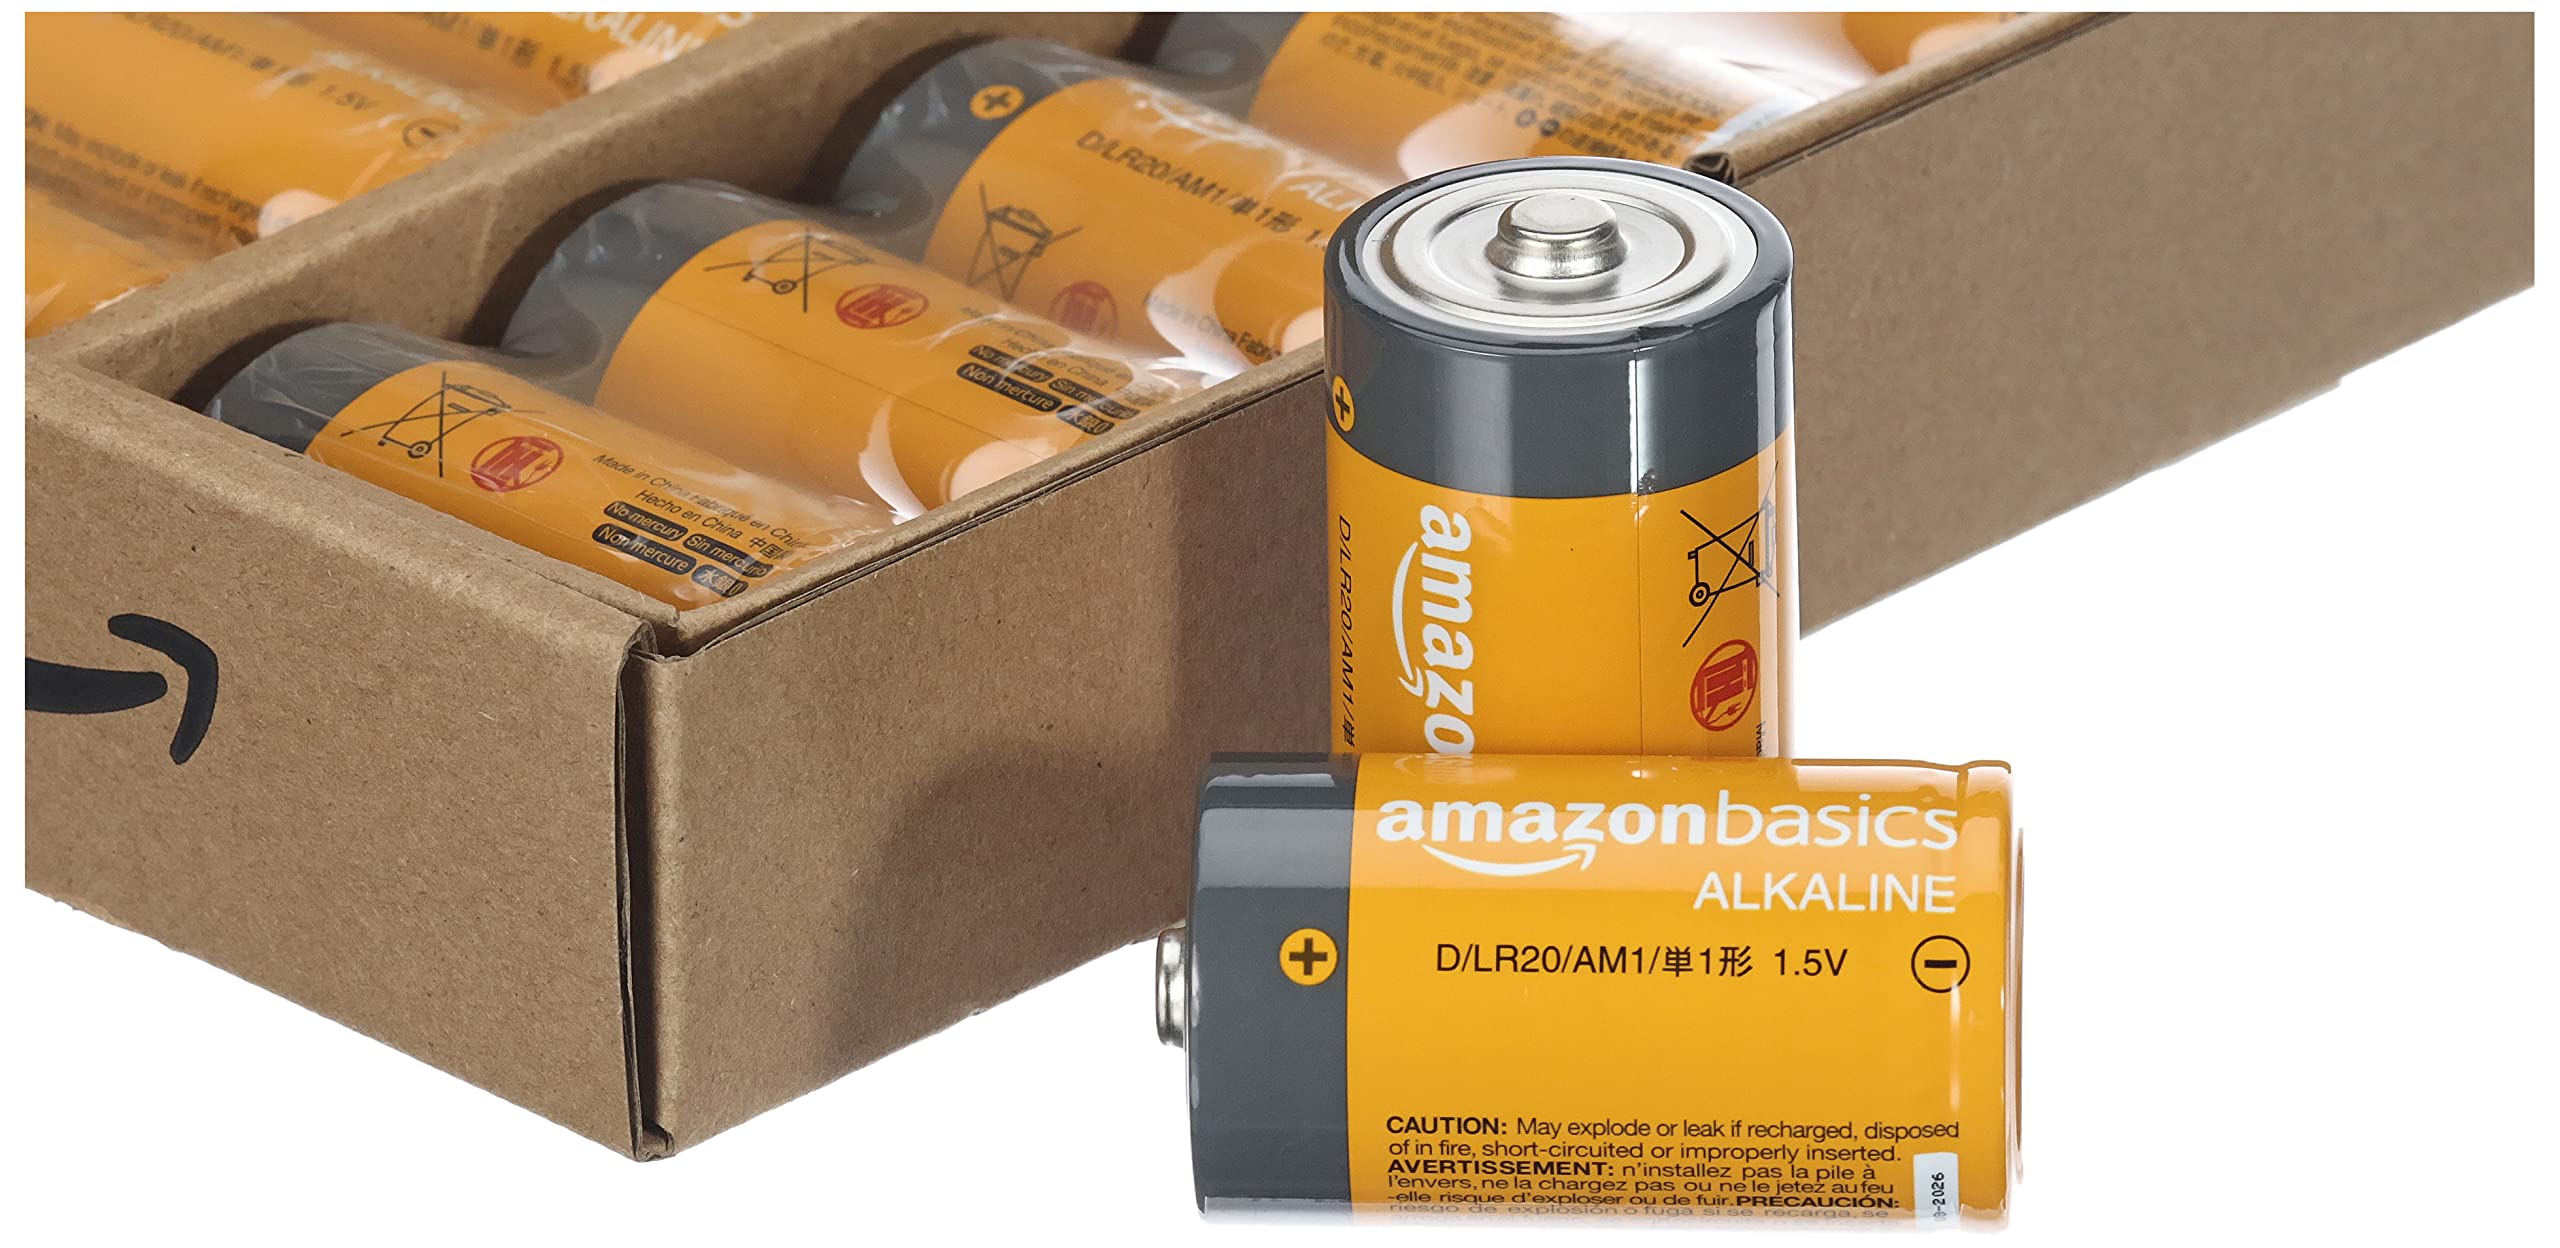 Amazon Basics D Cell All-Purpose Alkaline Batteries, 5-Year Shelf Life, 96 Count (8 Packs of 12)